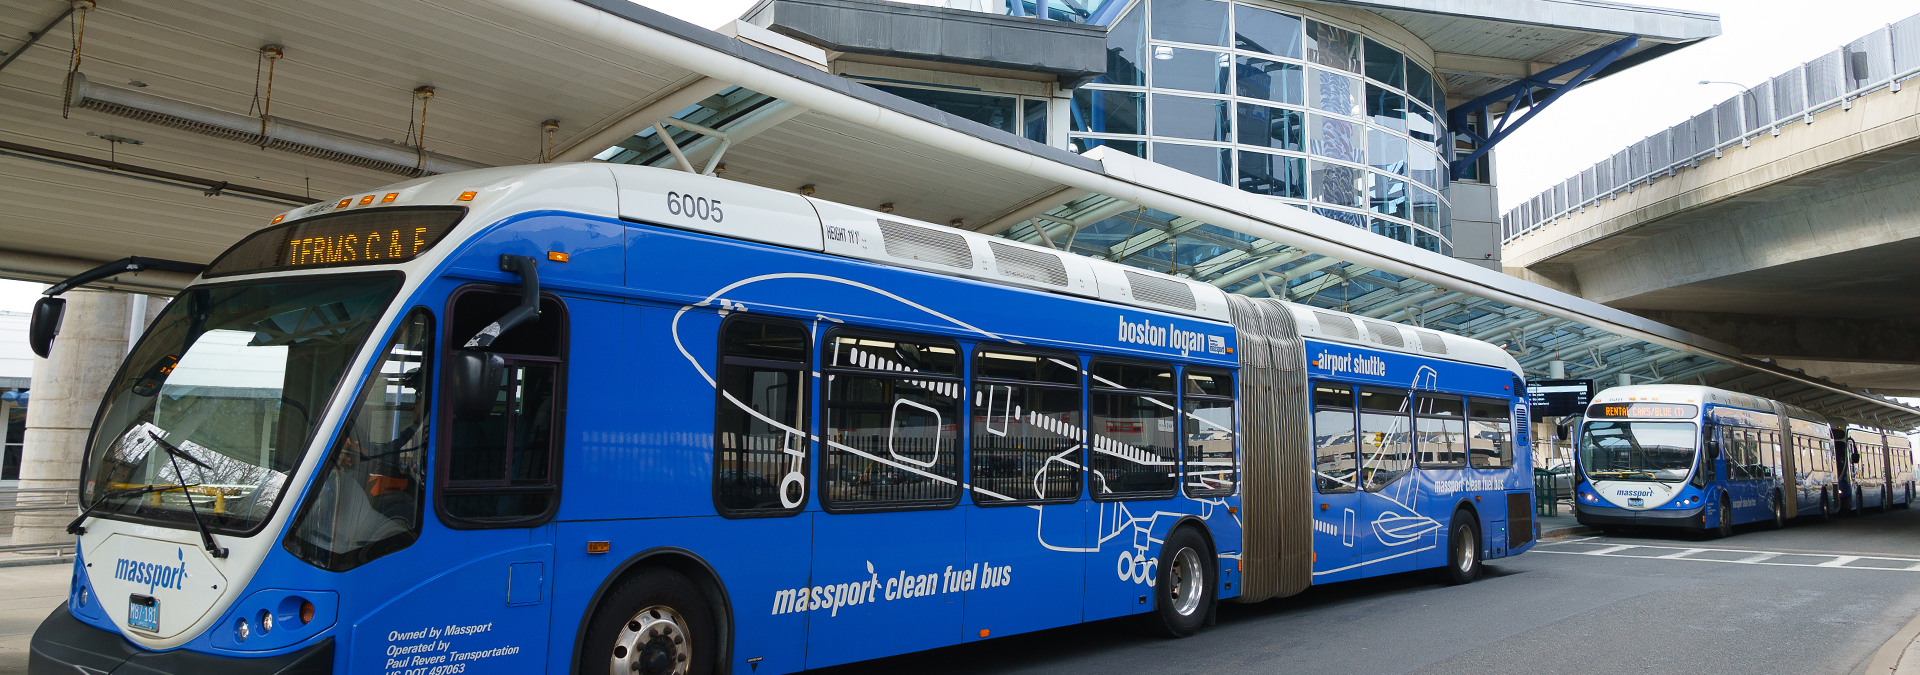 On-Airport Shuttle Busses at the Airport Blue Line Station